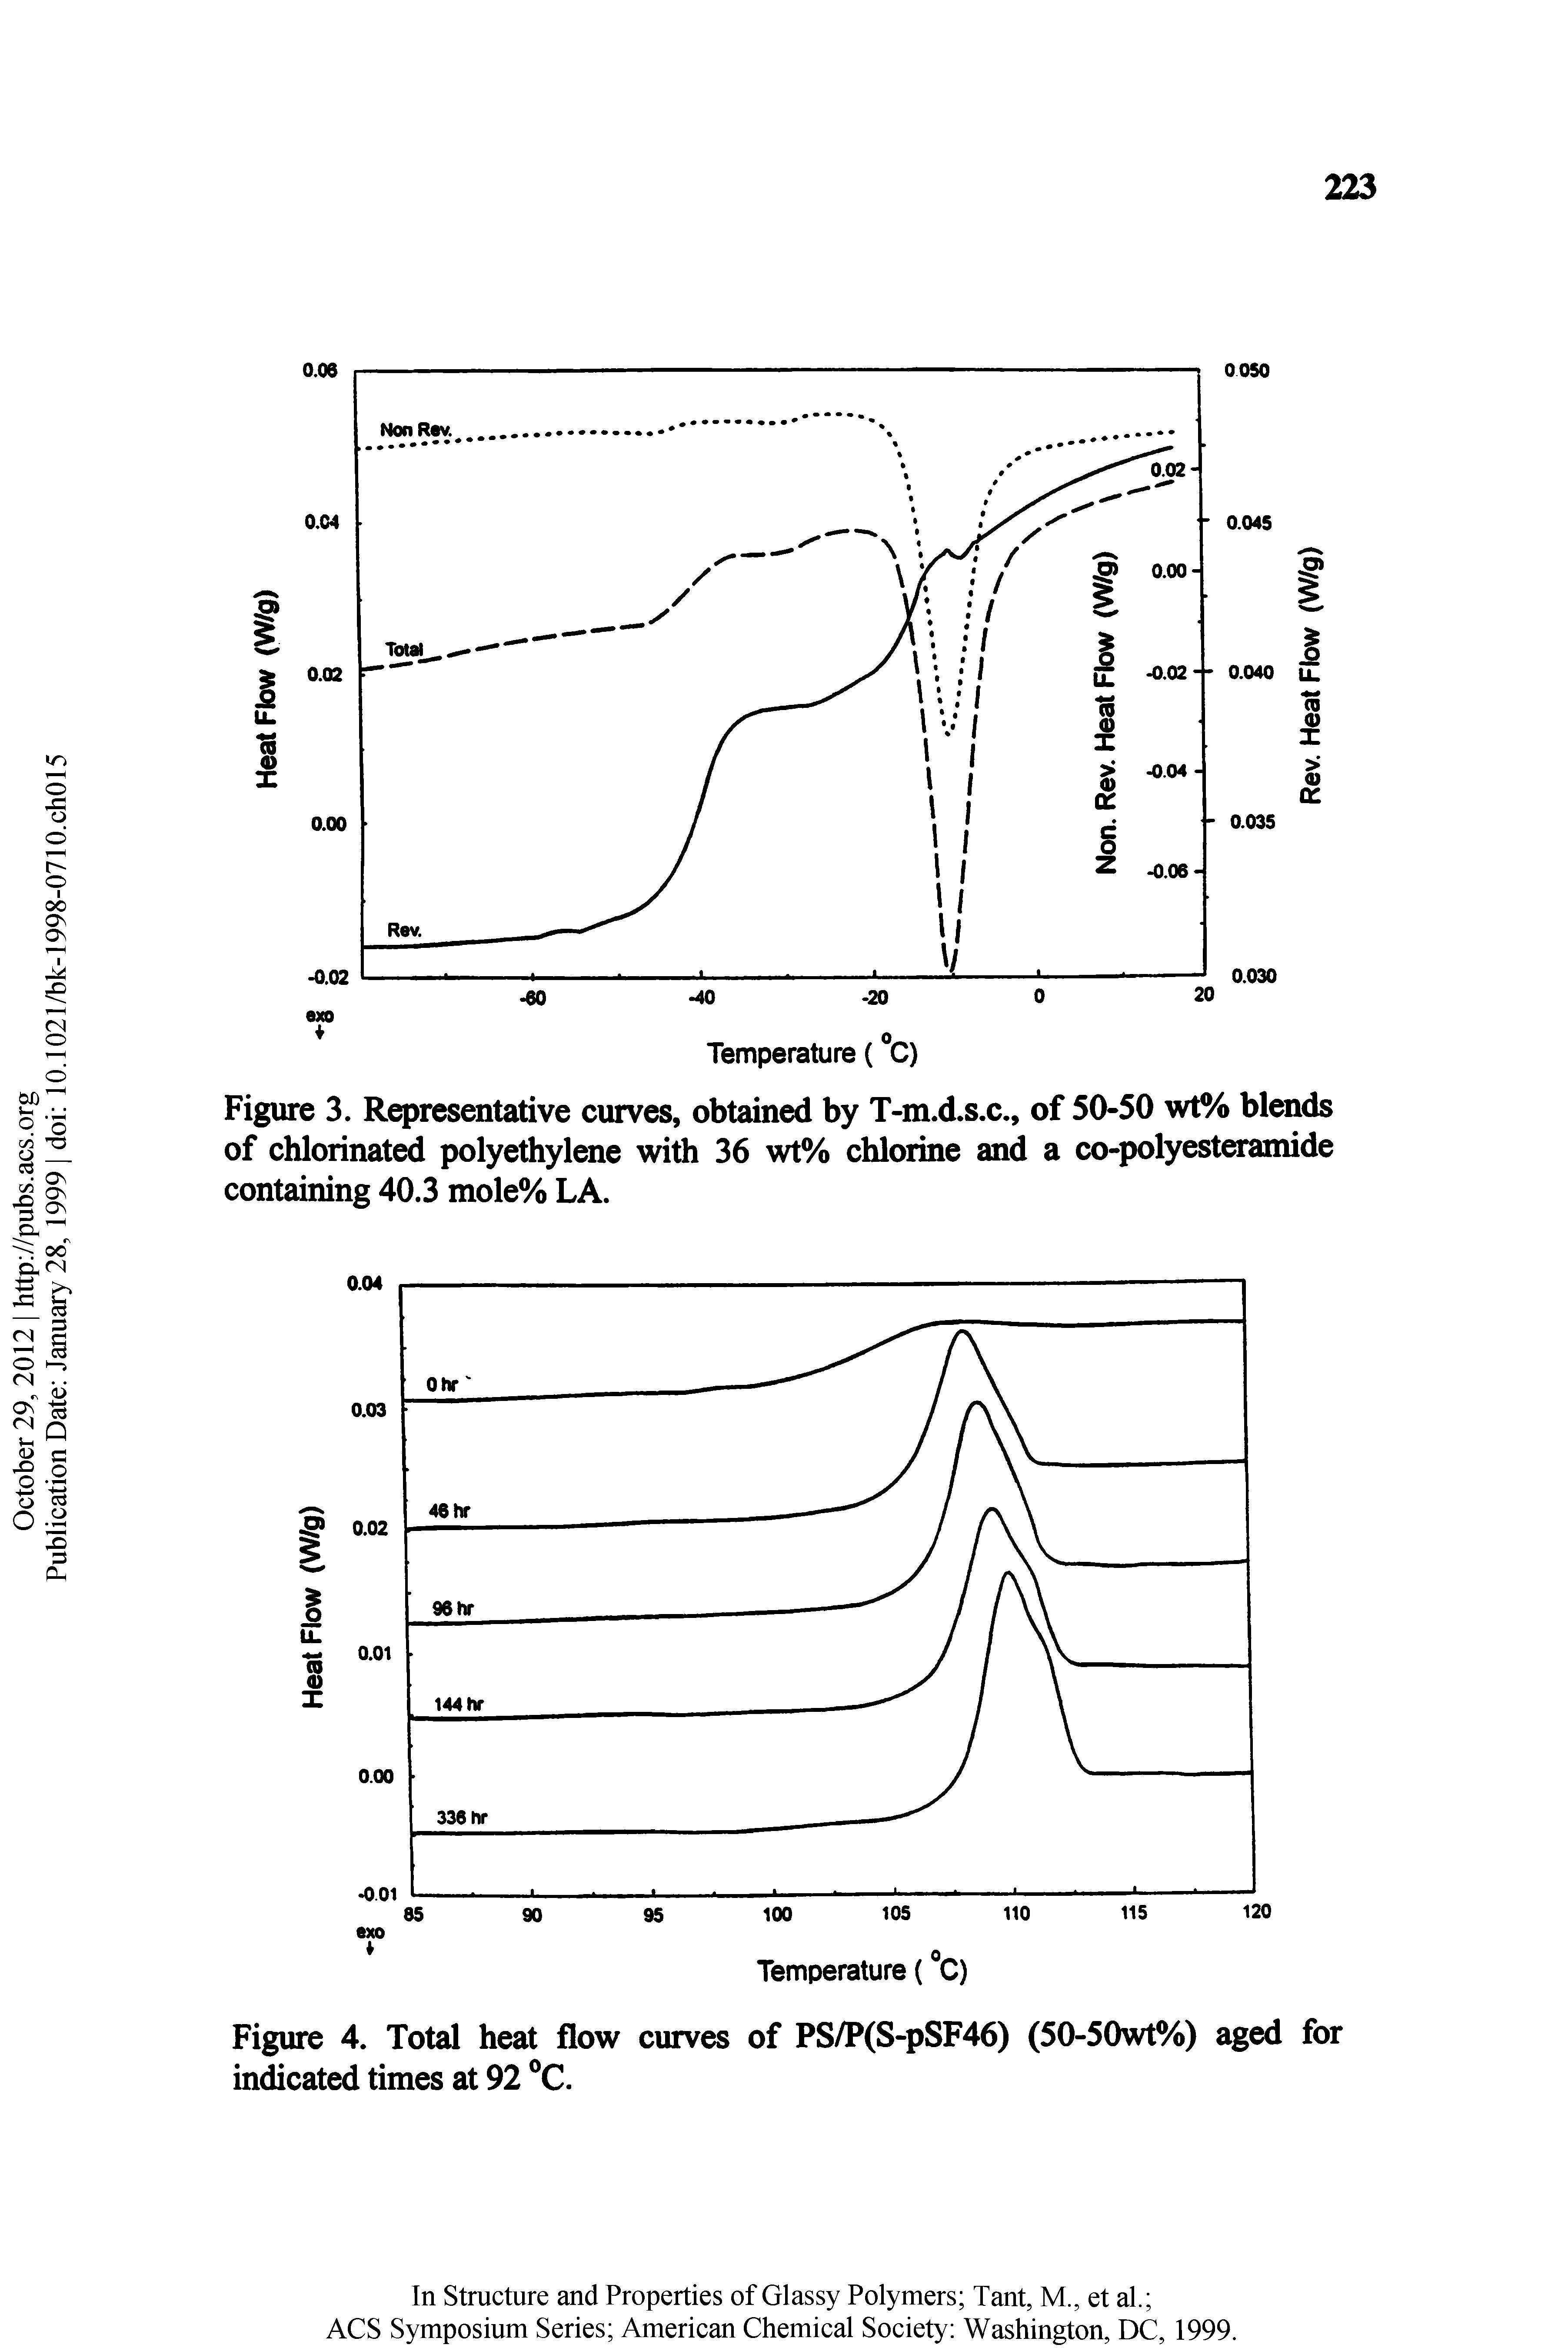 Figure 3. Representative curves, obtained by T-m.d.s.c., of 50-50 wt% blends of chlorinat polyethylene with 36 wt% chlorine and a co-polyesteramide containing 40.3 mole% LA.